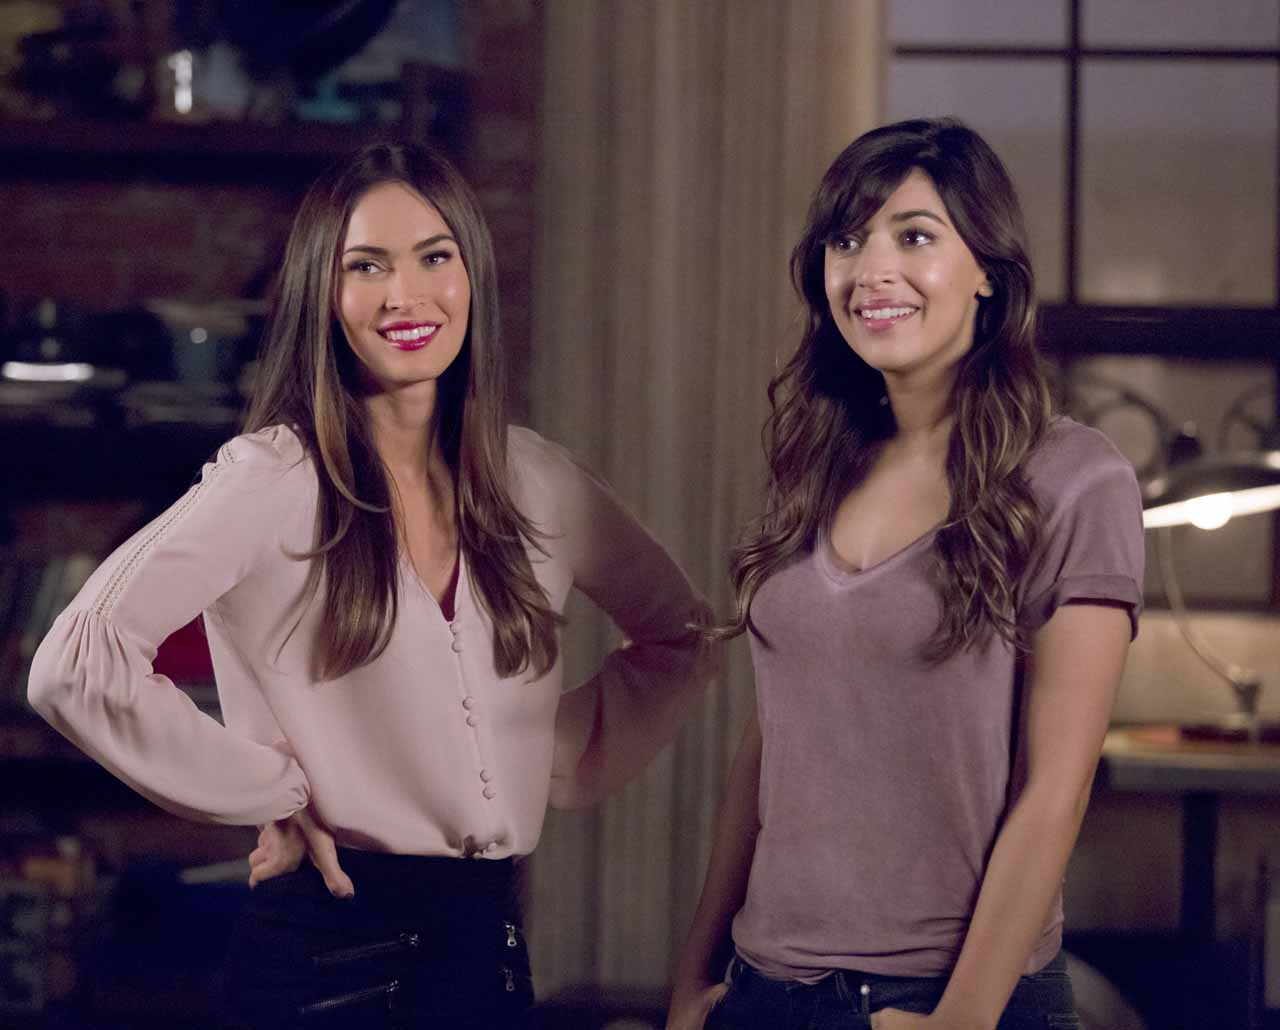 NEW GIRL:  L-R:  Guest star Megan Fox and Hannah Simone in the "Reagan" episode of NEW GIRL airing Tuesday, Feb. 9 (8:00-8:30 PM ET/PT) on FOX.  Â©2016 Fox Broadcasting Co.  Cr:  Ray Mickshaw/FOX